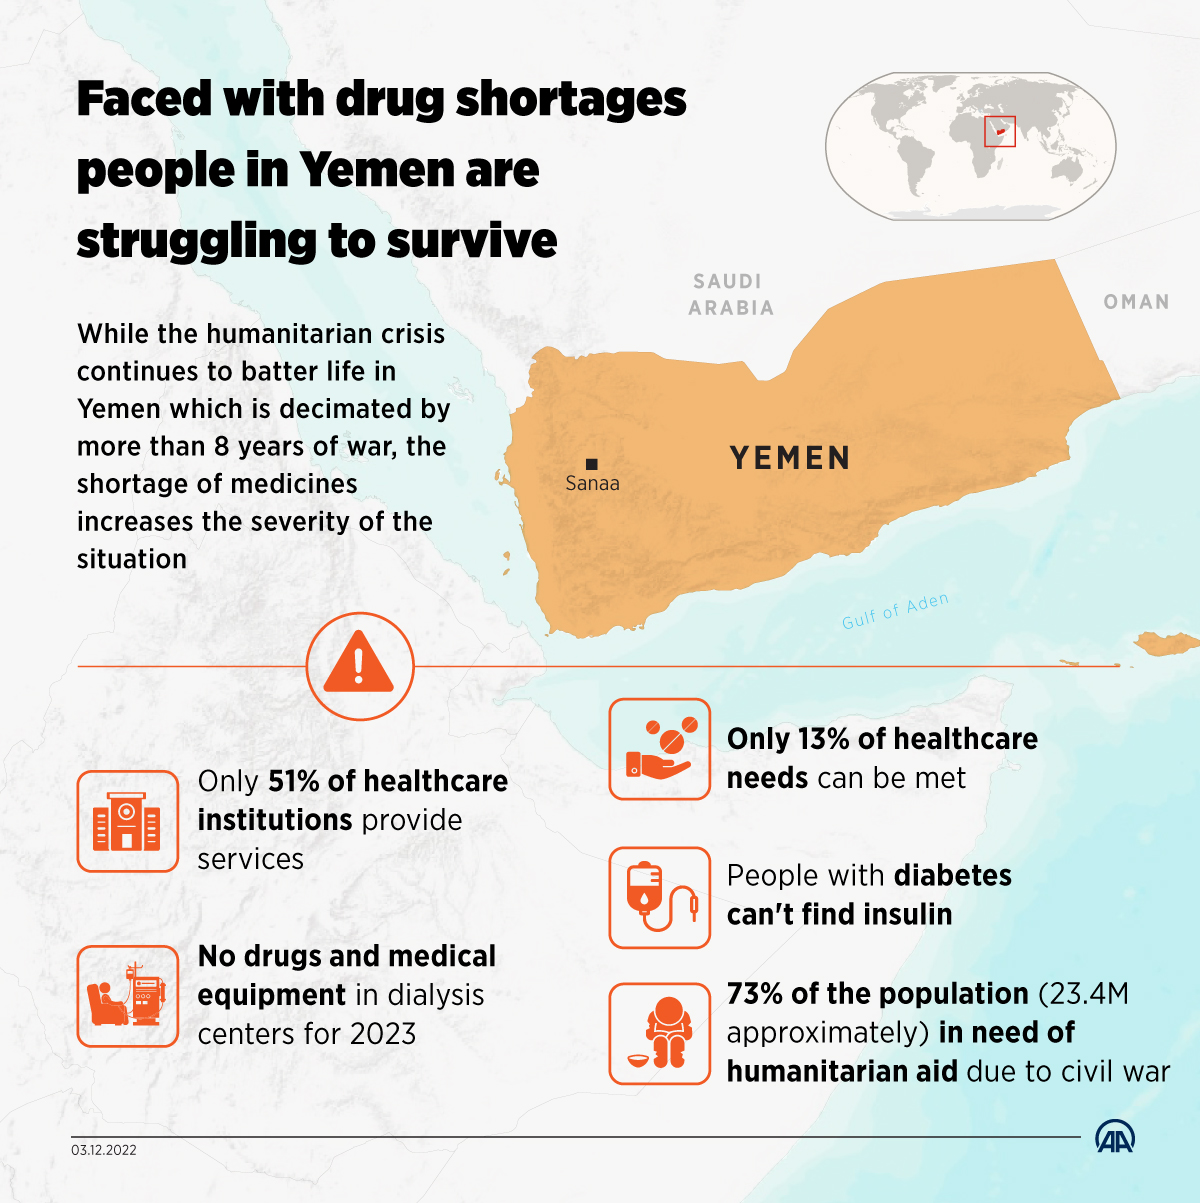 Faced with drug shortages people in Yemen are struggling to survive